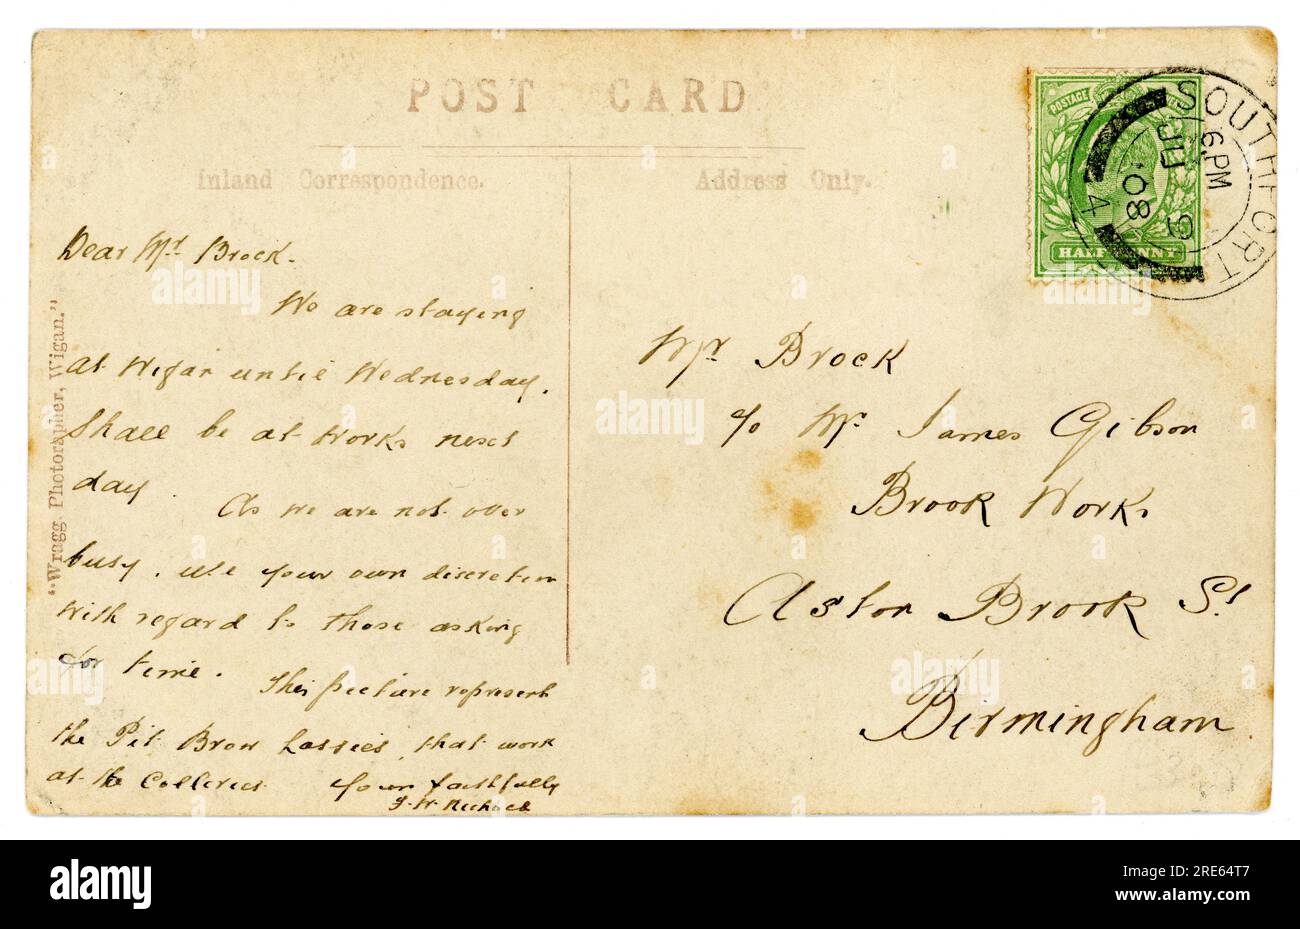 Reverse of original Edwardian era postcard, posted June 9th 1908. The stamp is green half penny King Edward VII stamp. Stock Photo